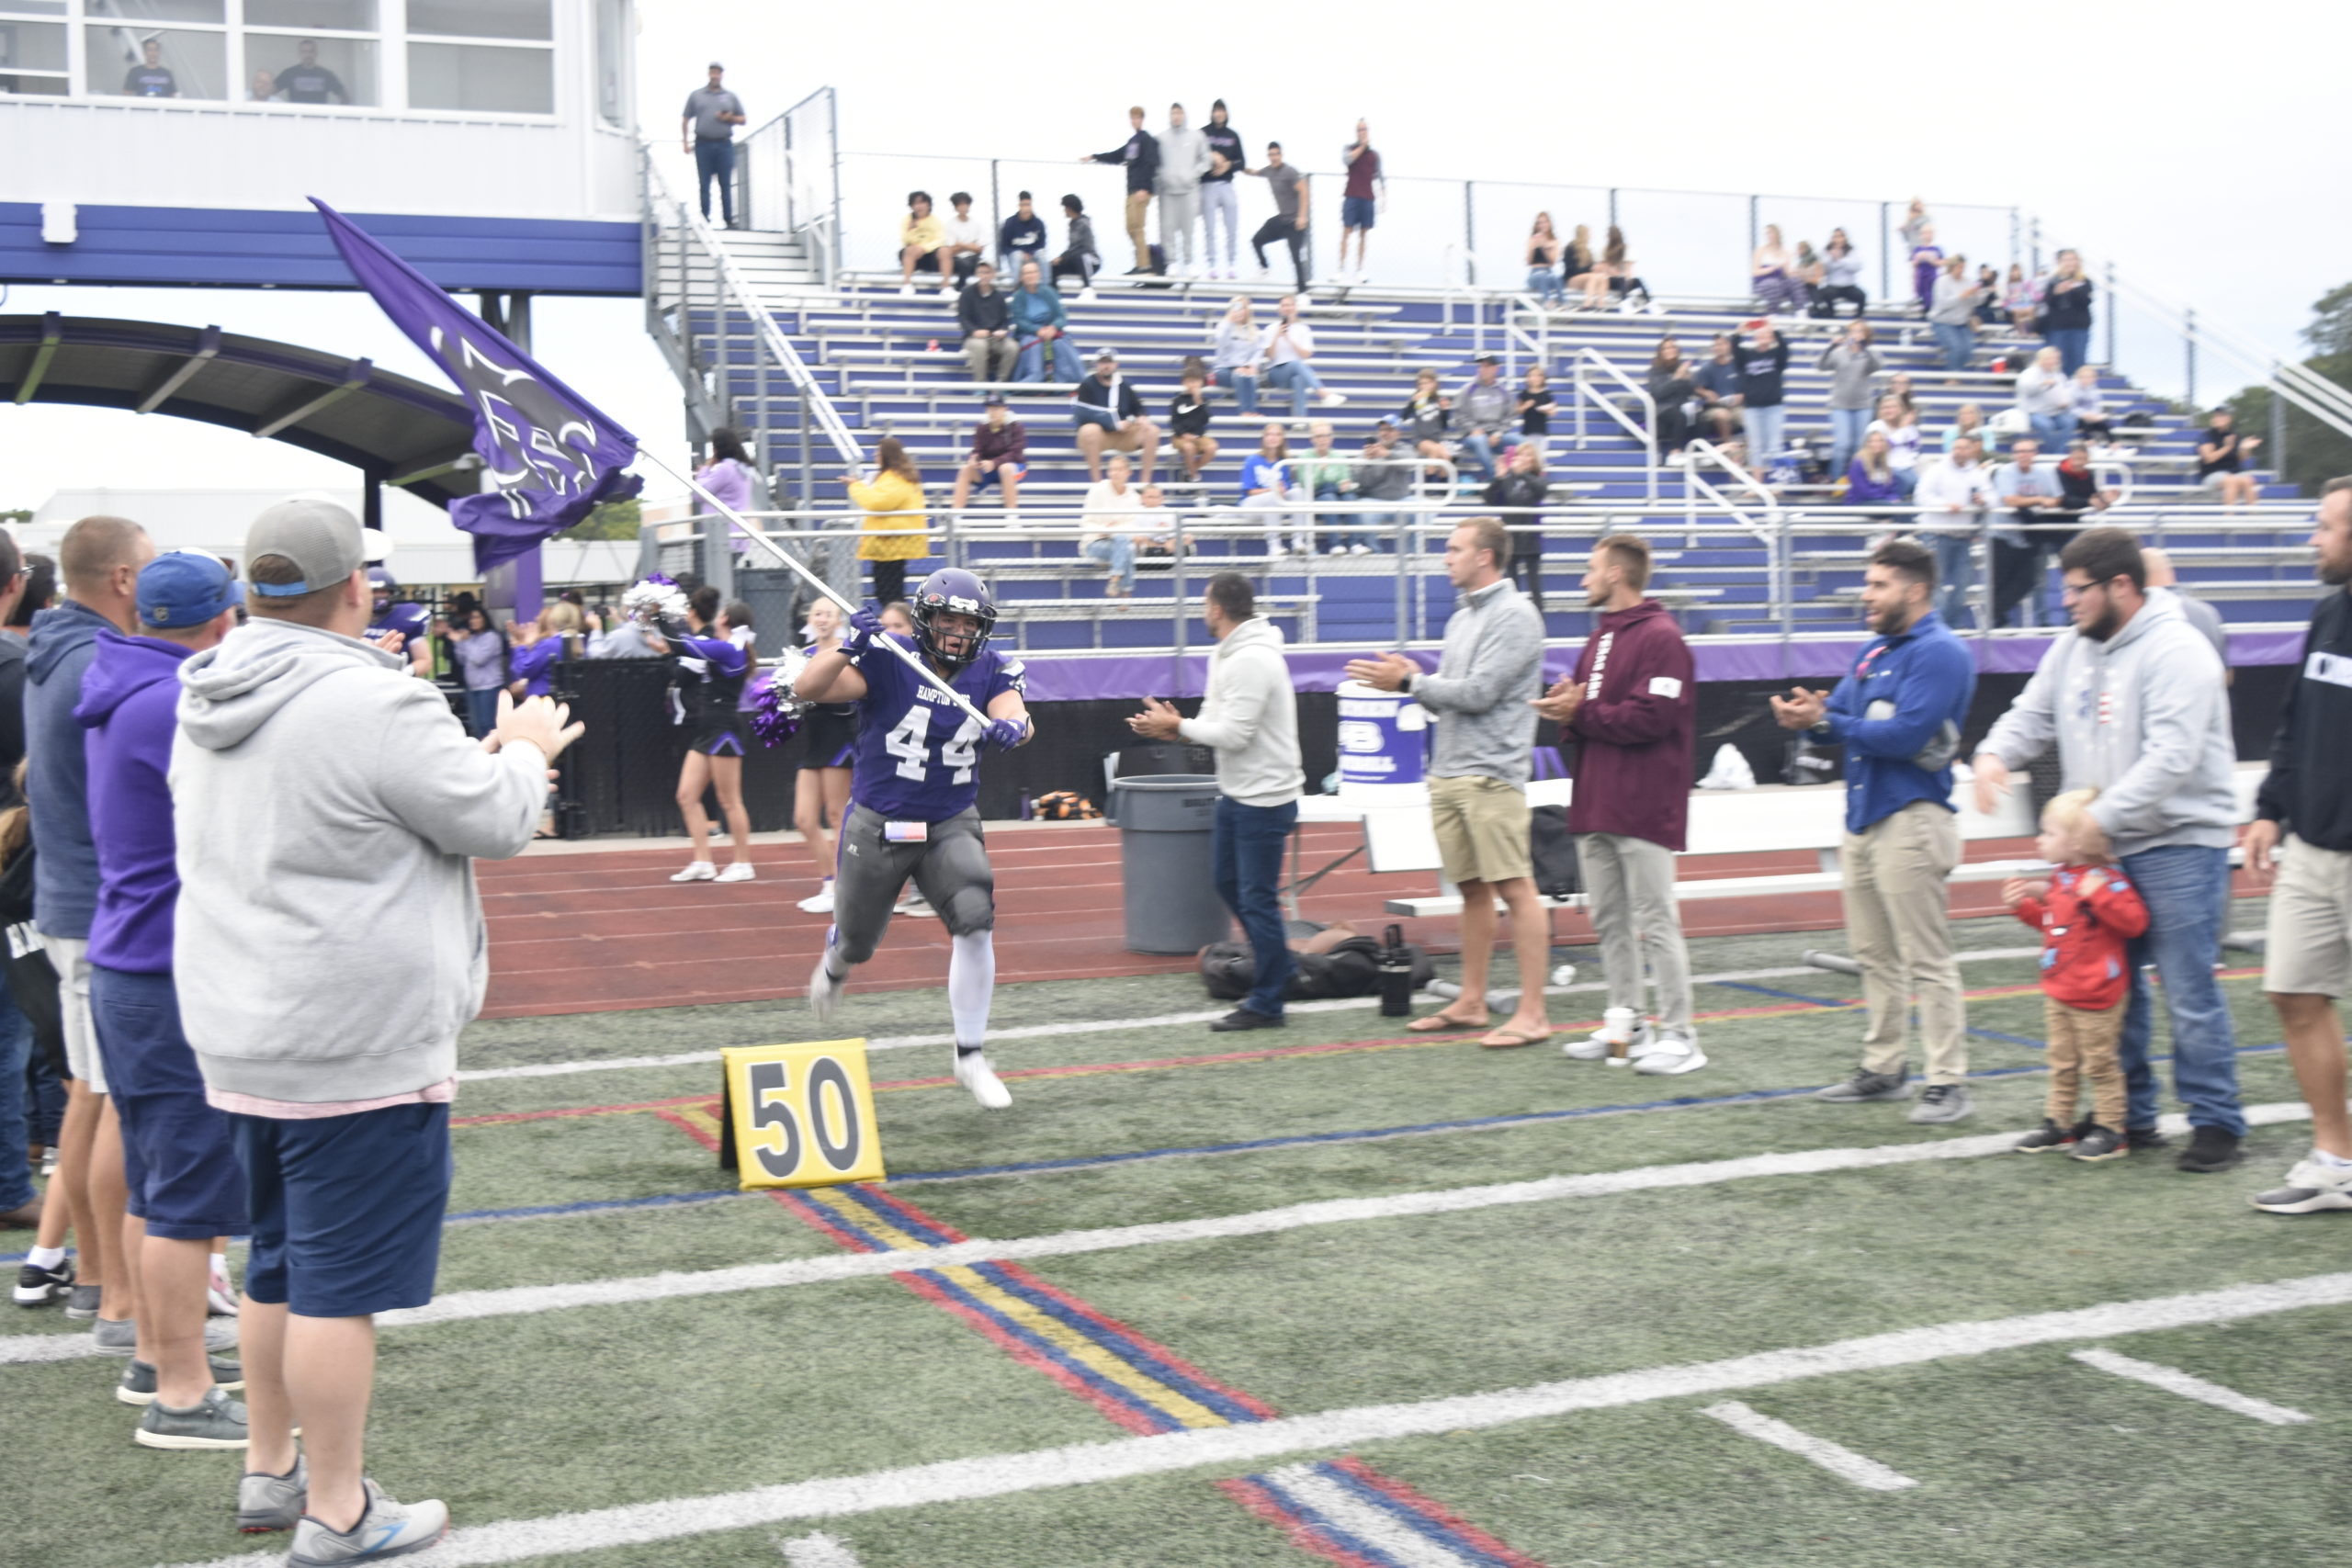 Surrounded by alumni, Cooper Shay leads the Baymen out onto the field just before Friday's game against Greenport/Mattituck/Southold.